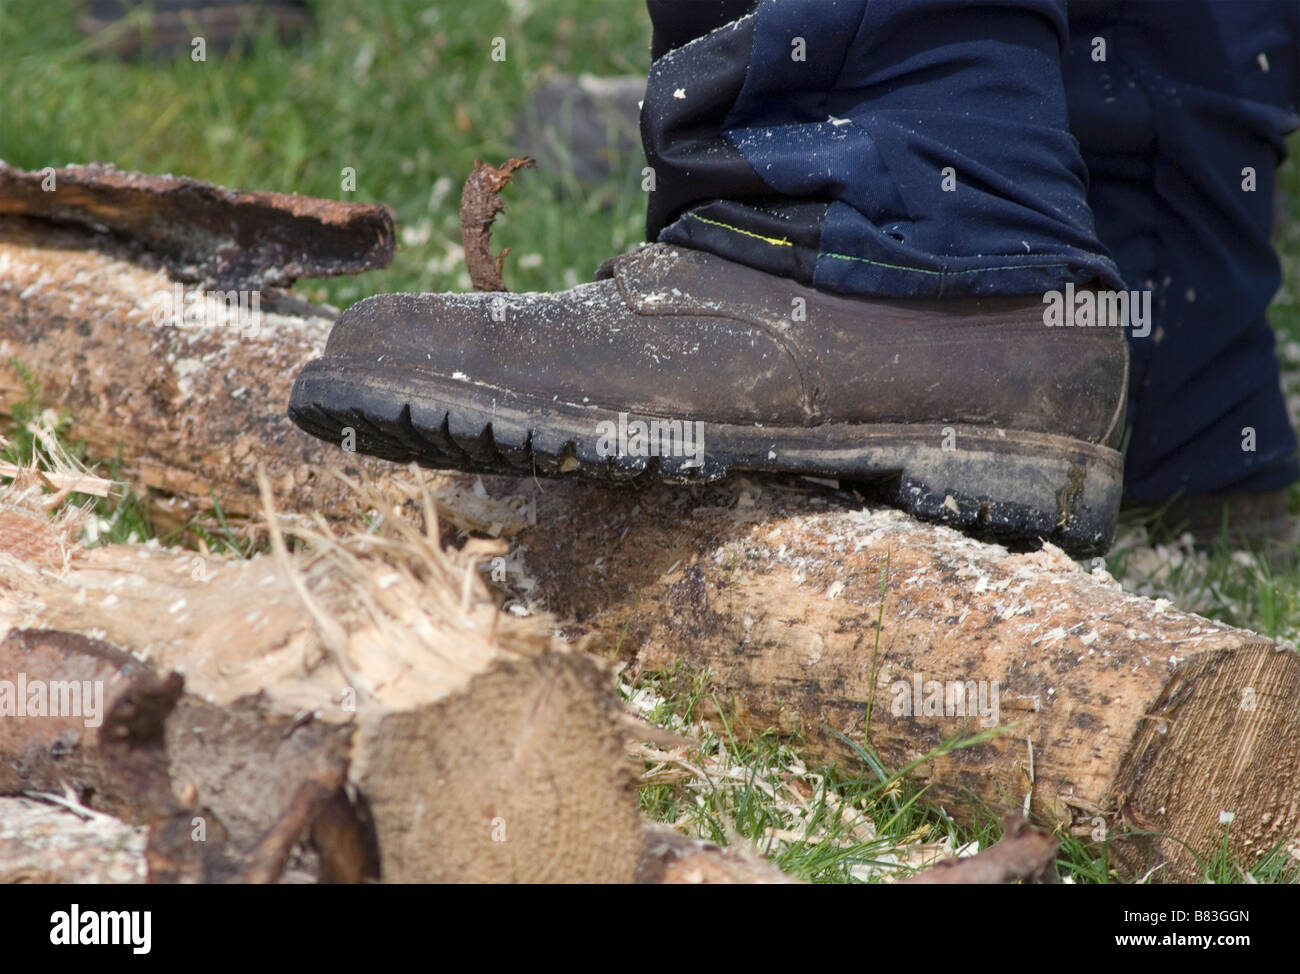 woodcutter boot over tree logs Stock Photo